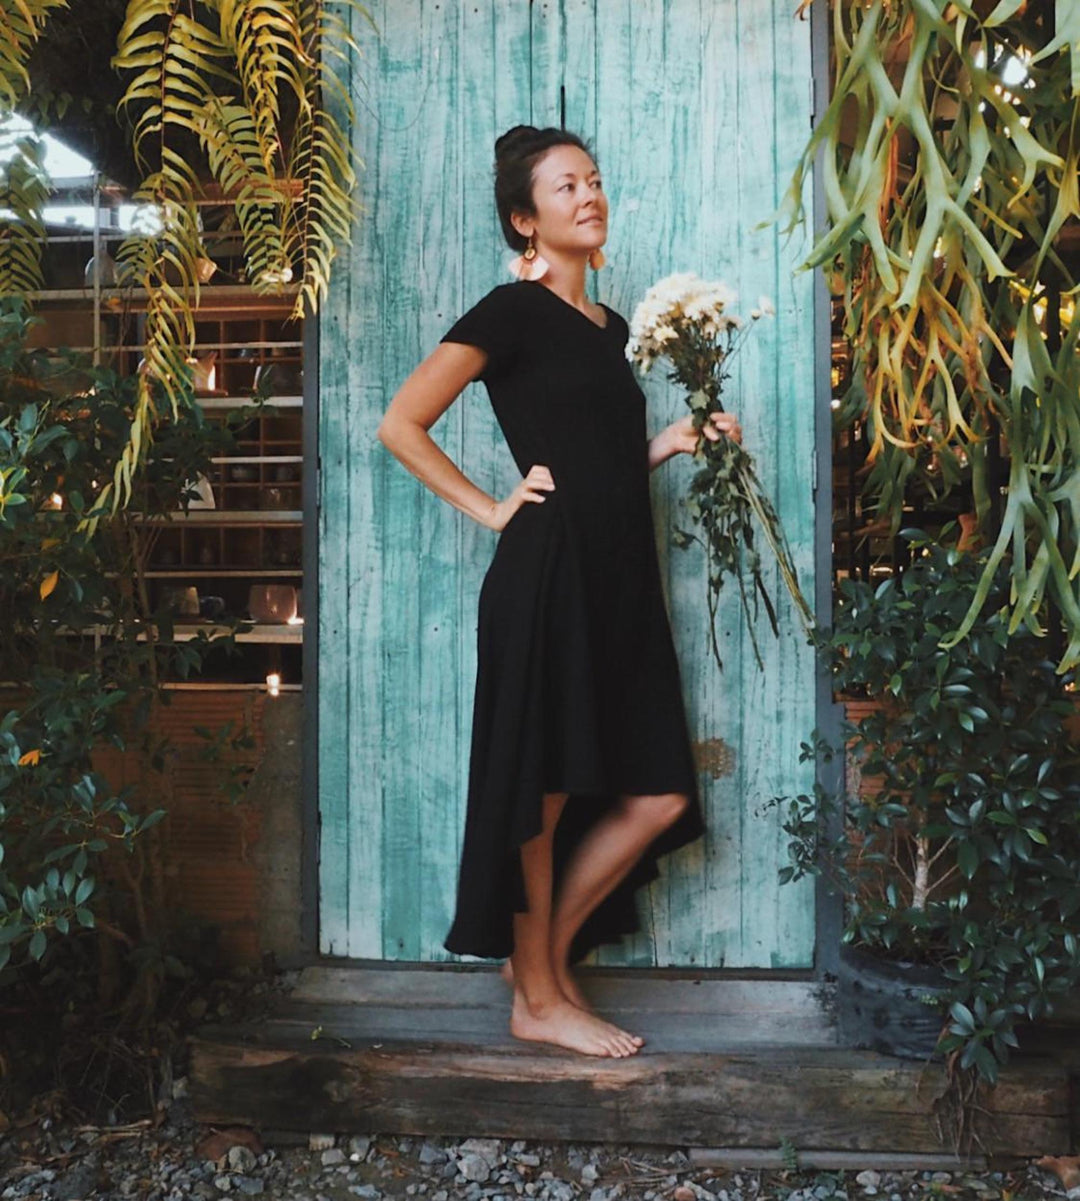 Woman stands in front of a blue door wearing a simple black dress while carrying white flowers.